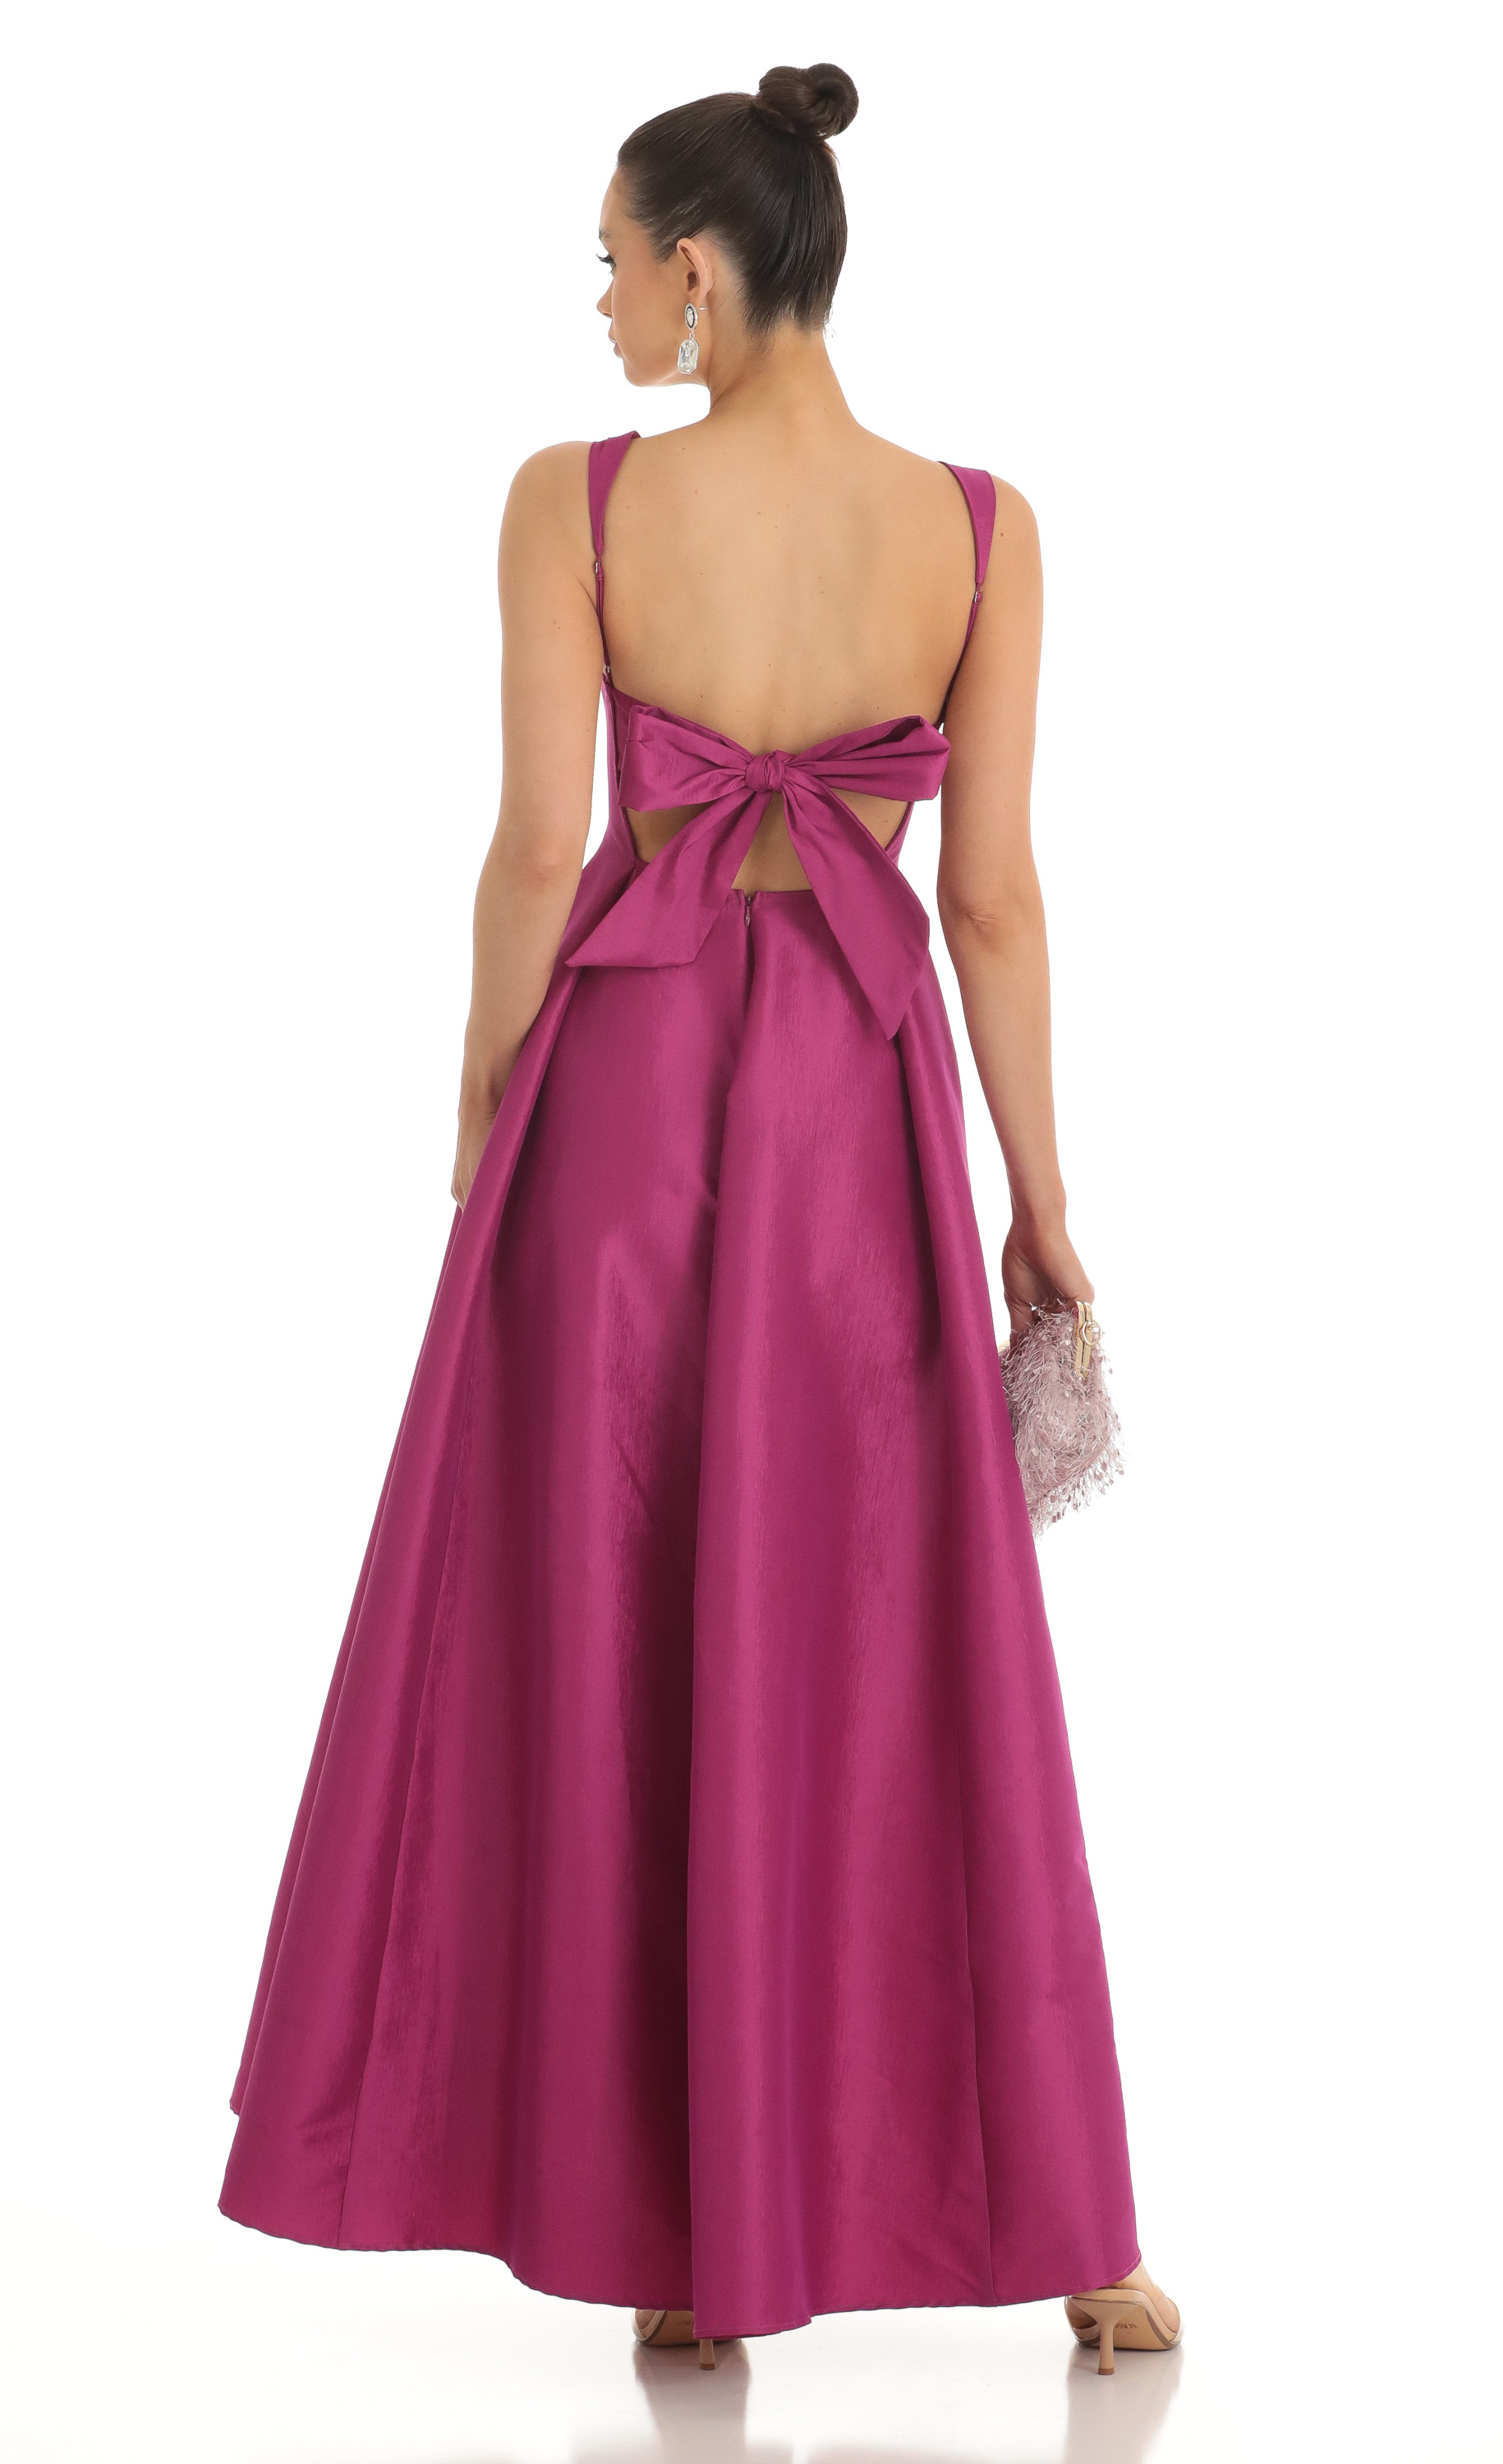 Foxie Fit and Flare Maxi Dress in Dark Pink